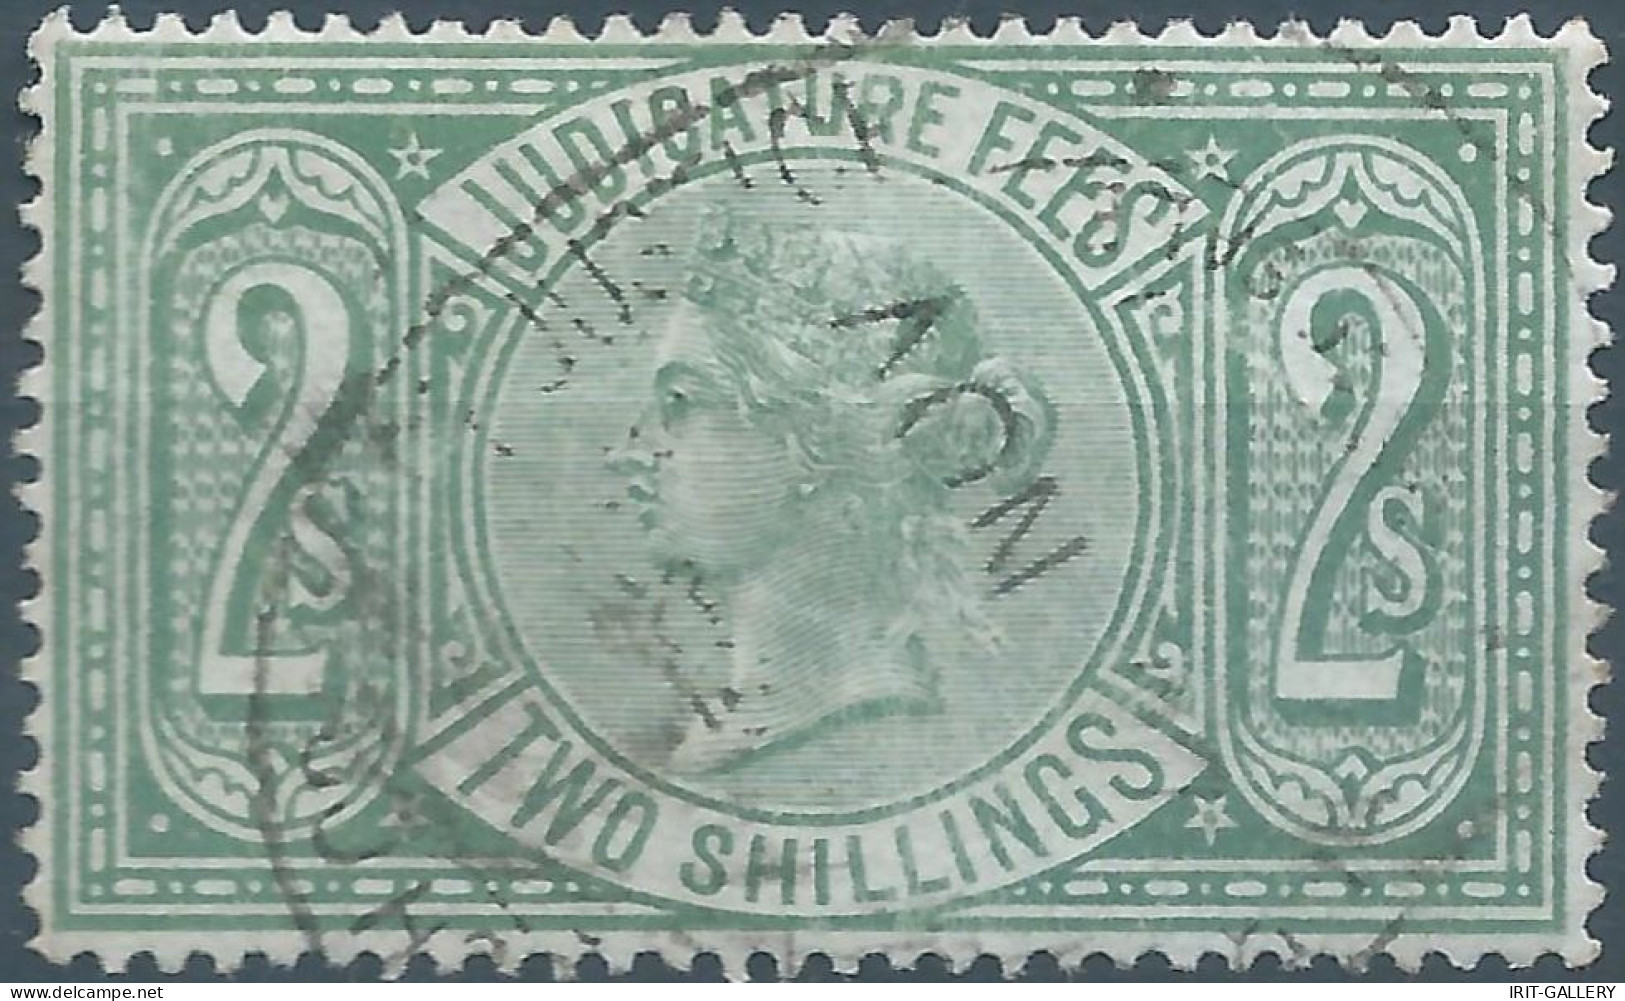 Great Britain-ENGLAND,Queen Victoria,1880-1900 Revenue Stamp Tax Fiscal,JUDICATURE FEES,2 Shillings,Used - Revenue Stamps